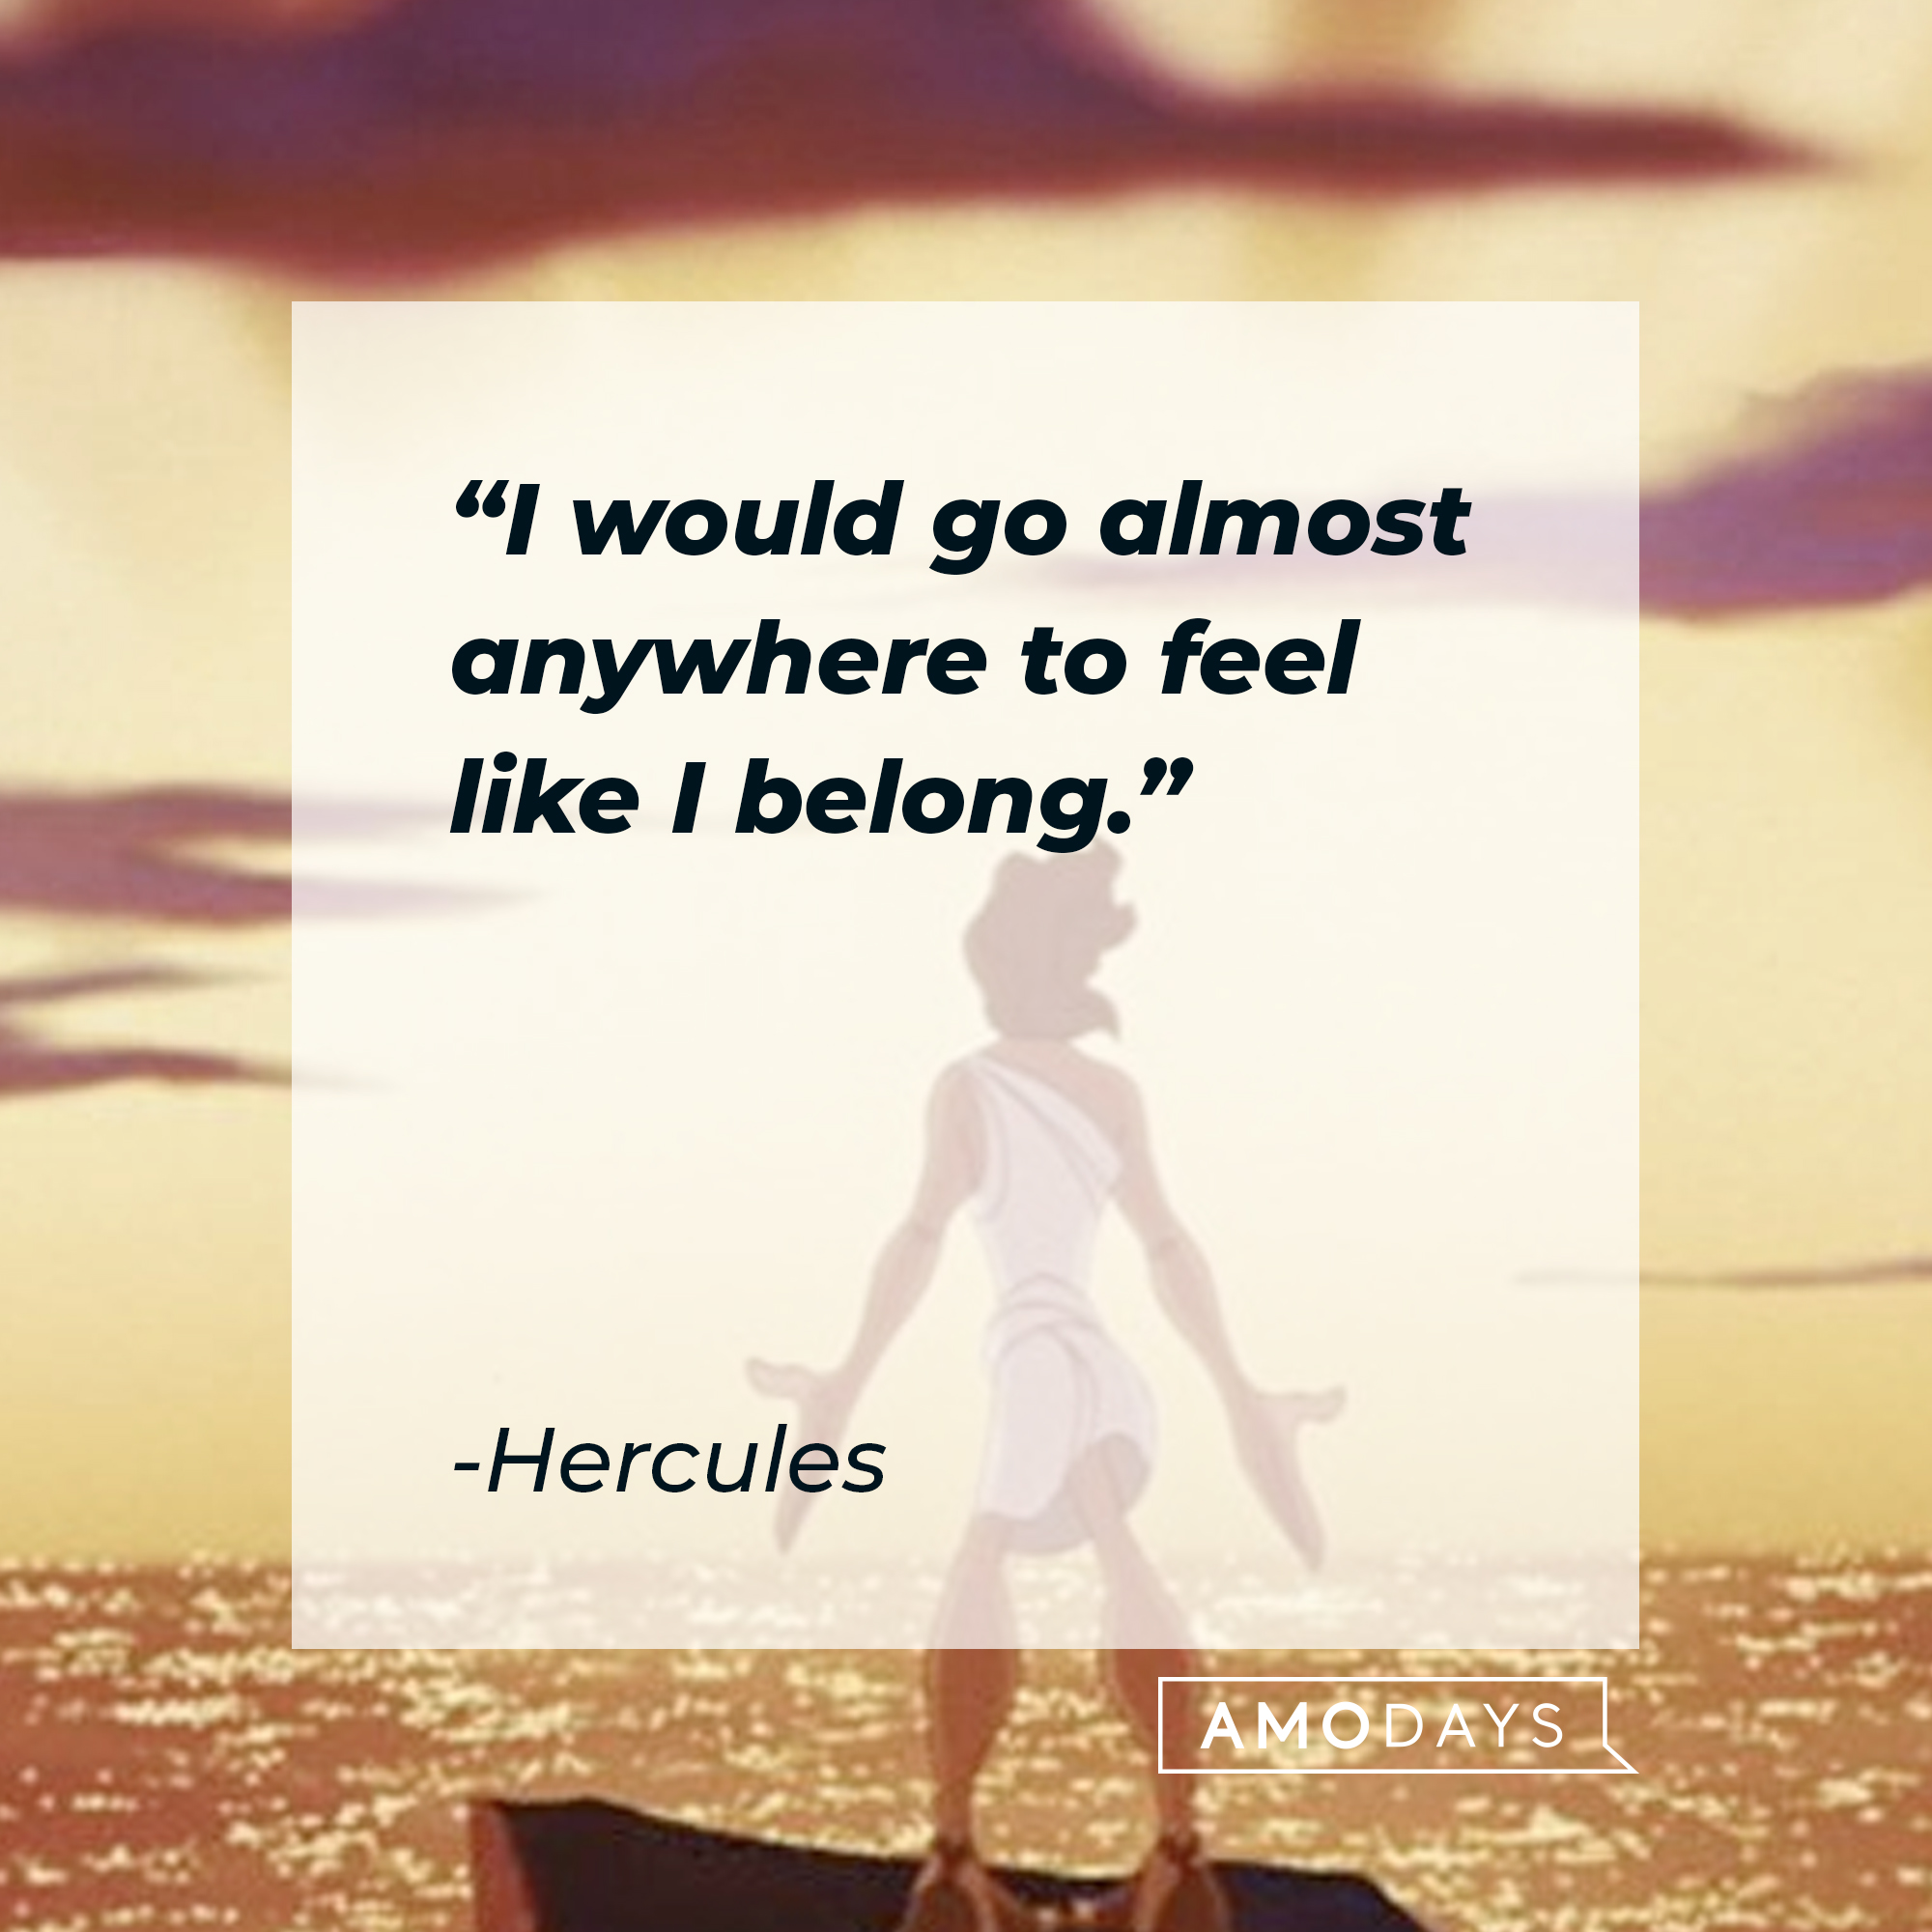 Hercules from the movie "Hercules" with his quote: “I would go almost anywhere to feel like I belong.” | Source: Facebook.com/DisneyHercules